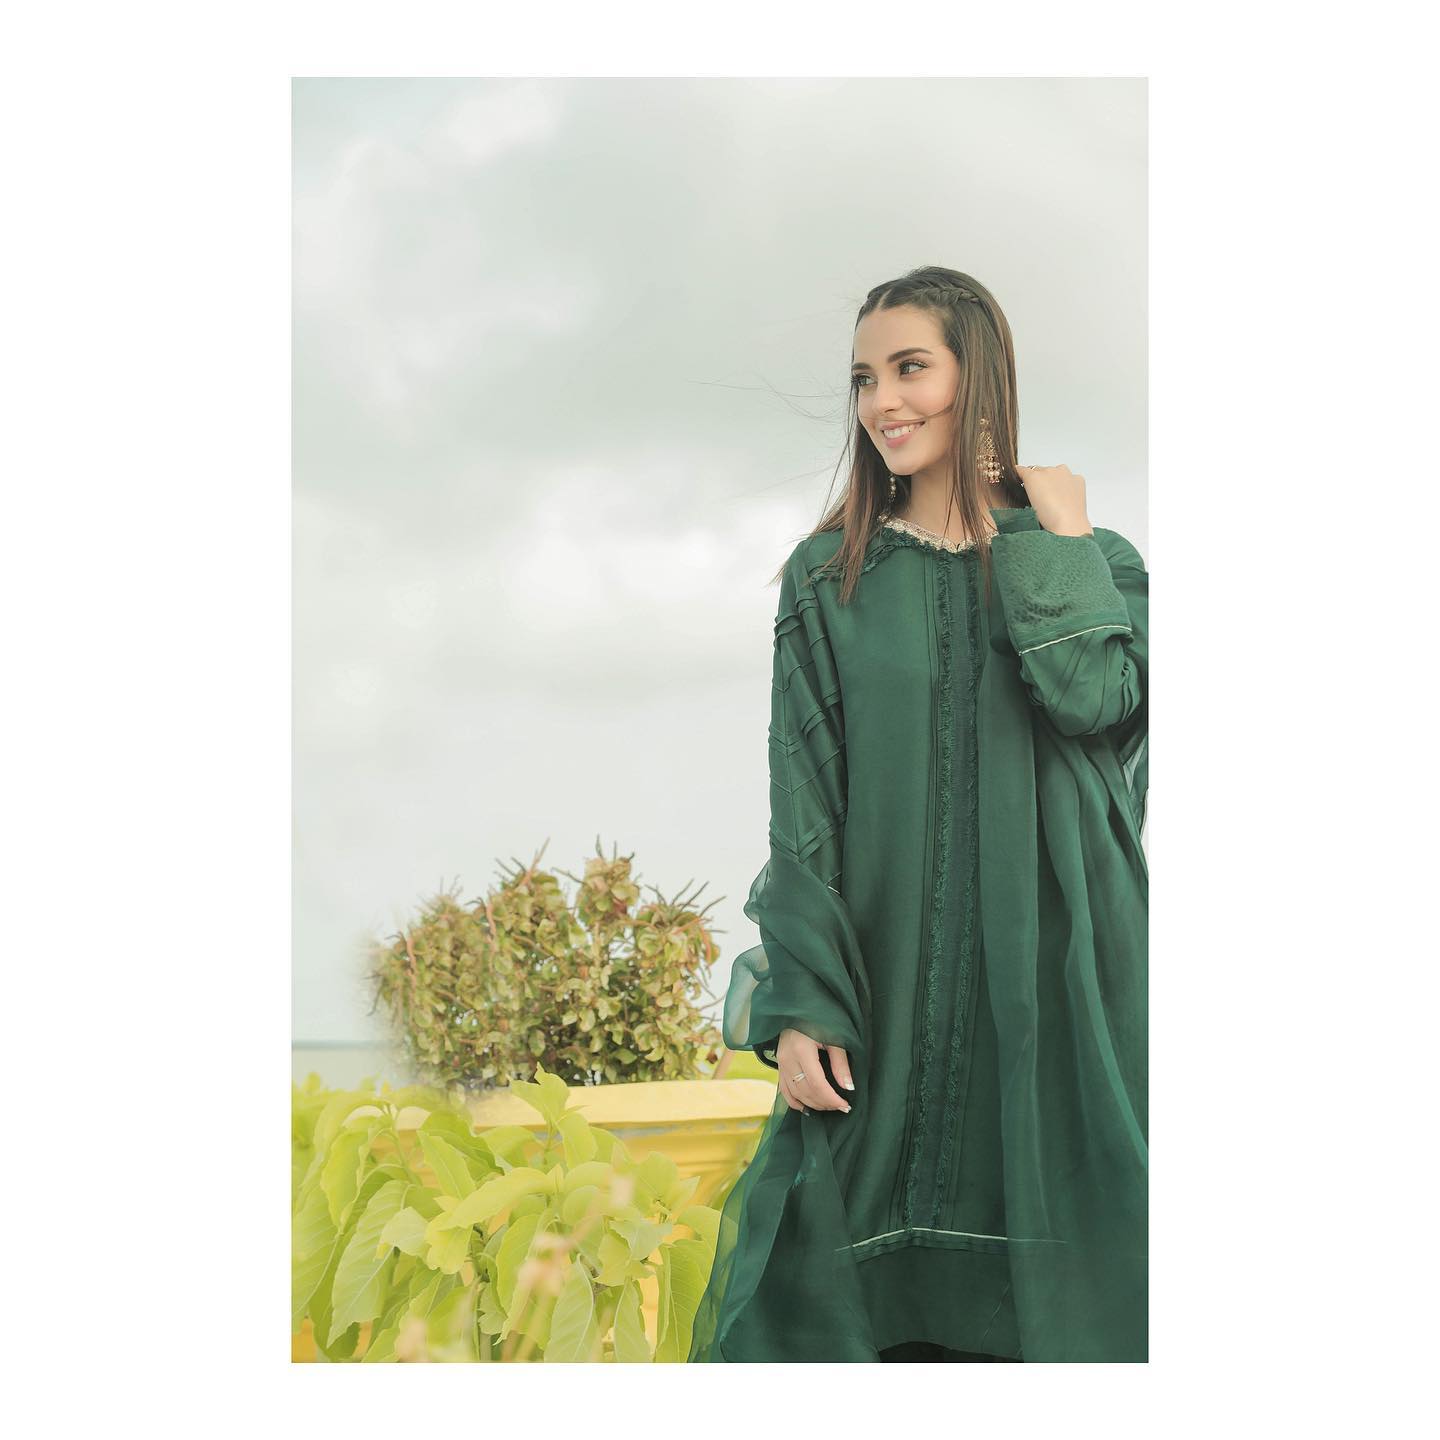 Iqra in green outfit 